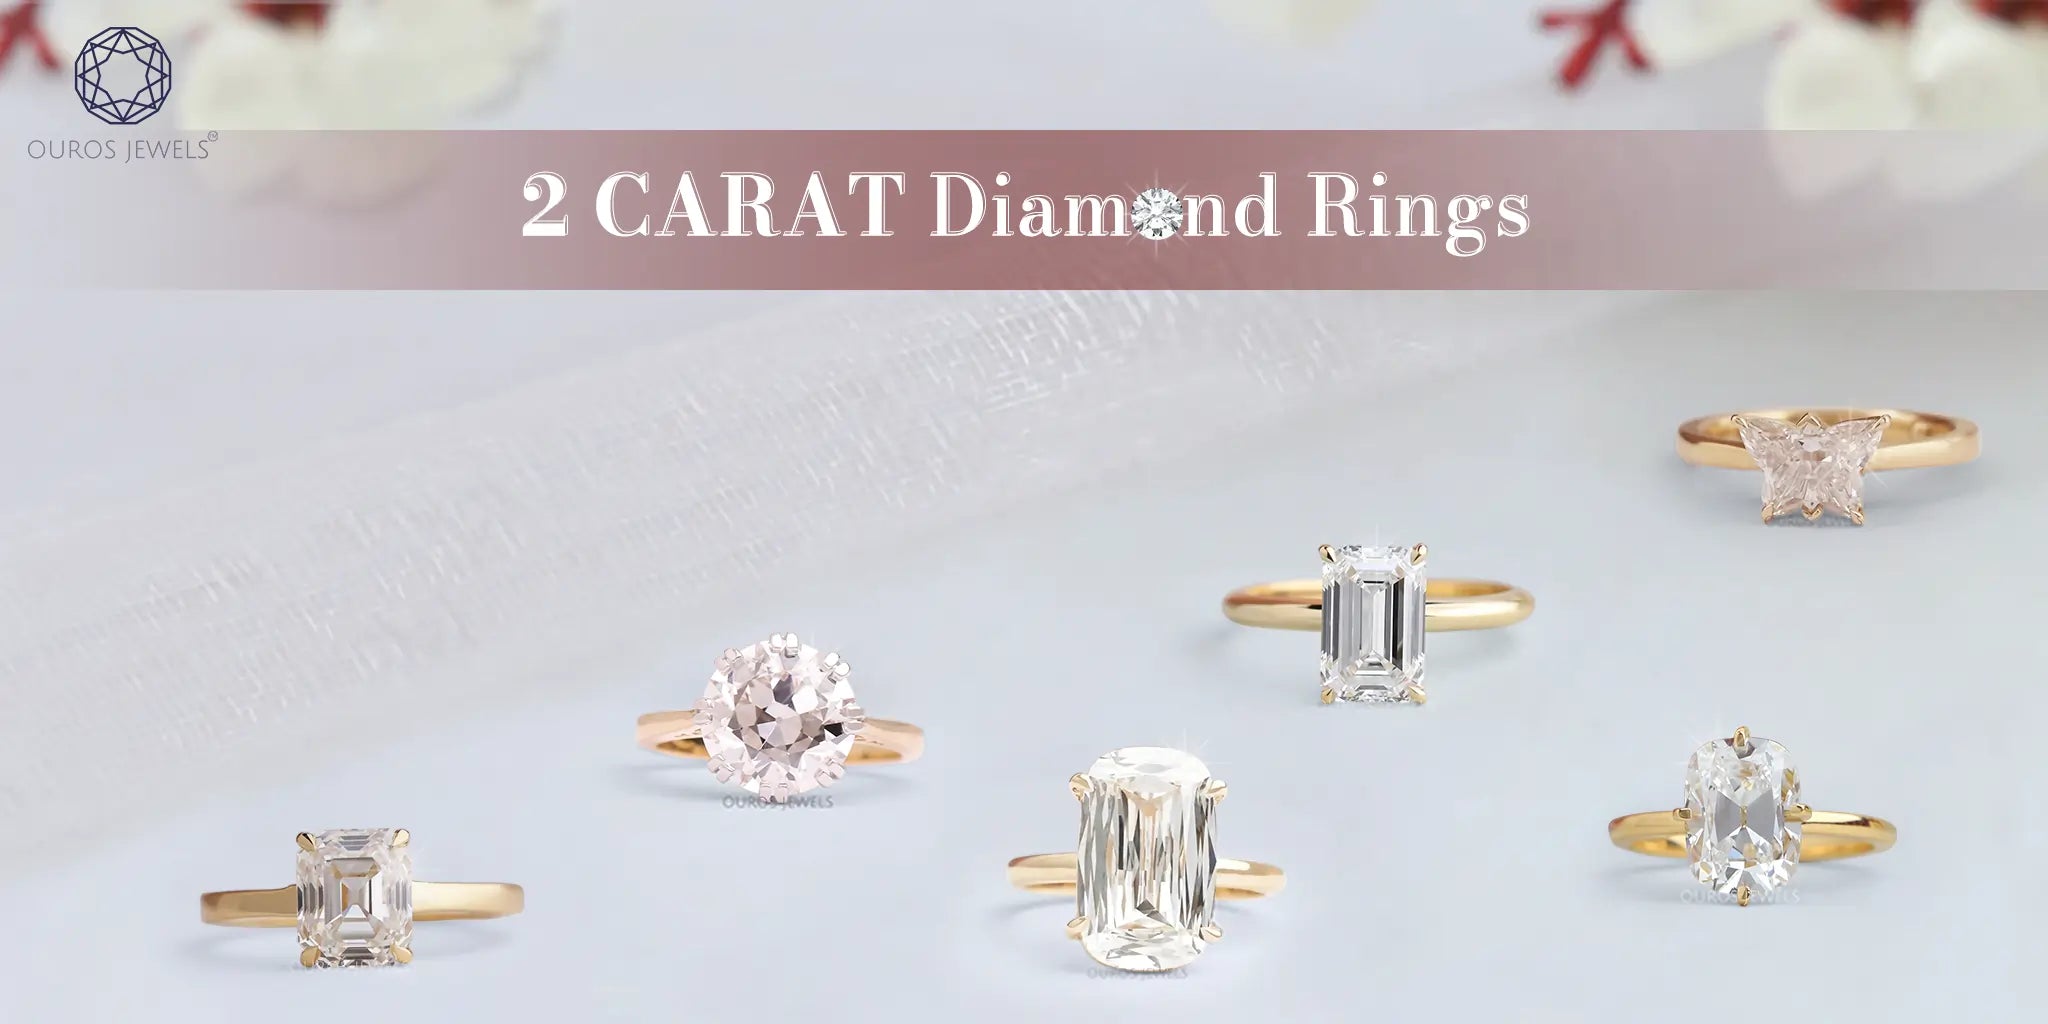 [2 carat diamond rings in gold settings, featuring round, princess, emerald, and cushion cuts. Showcasing the elegance and variety of 2 carat diamond rings]-[ouros jewels]